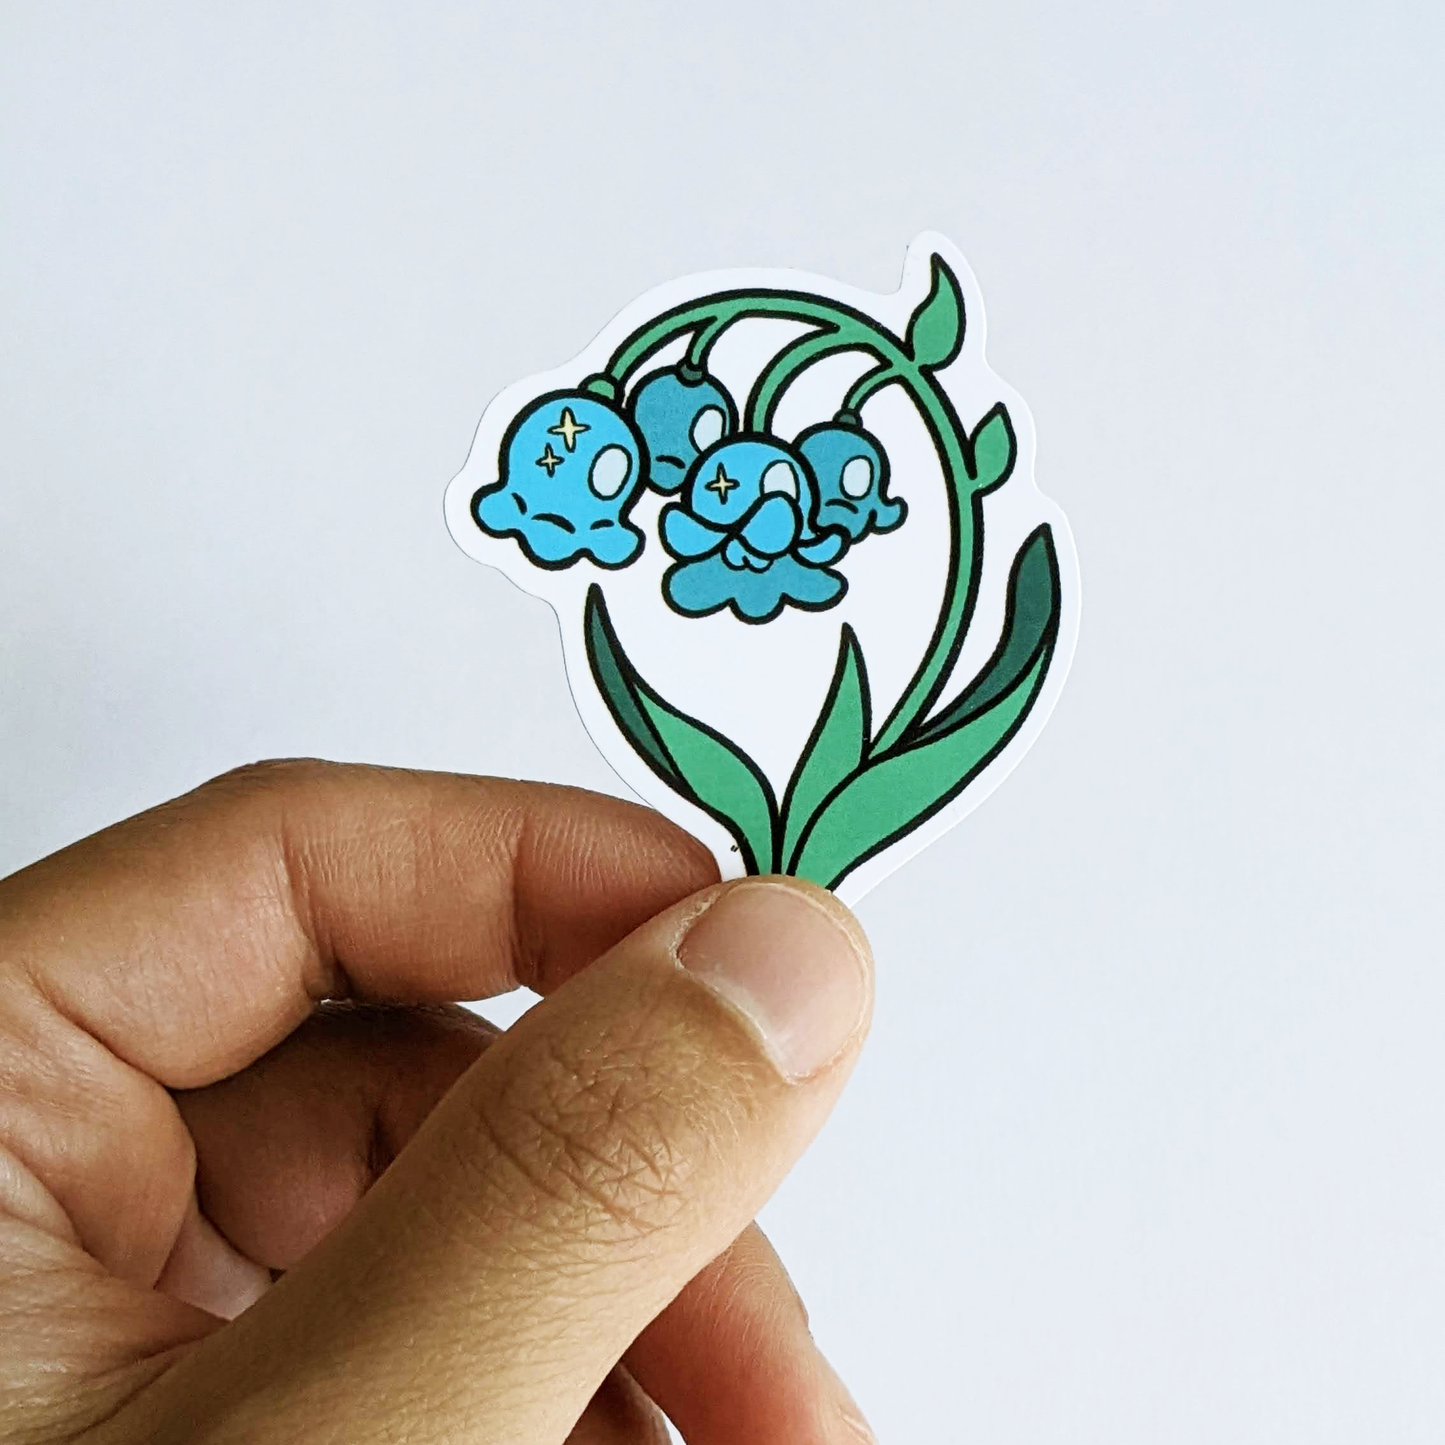 Stickers - Flowers of the Wild (6pcs)